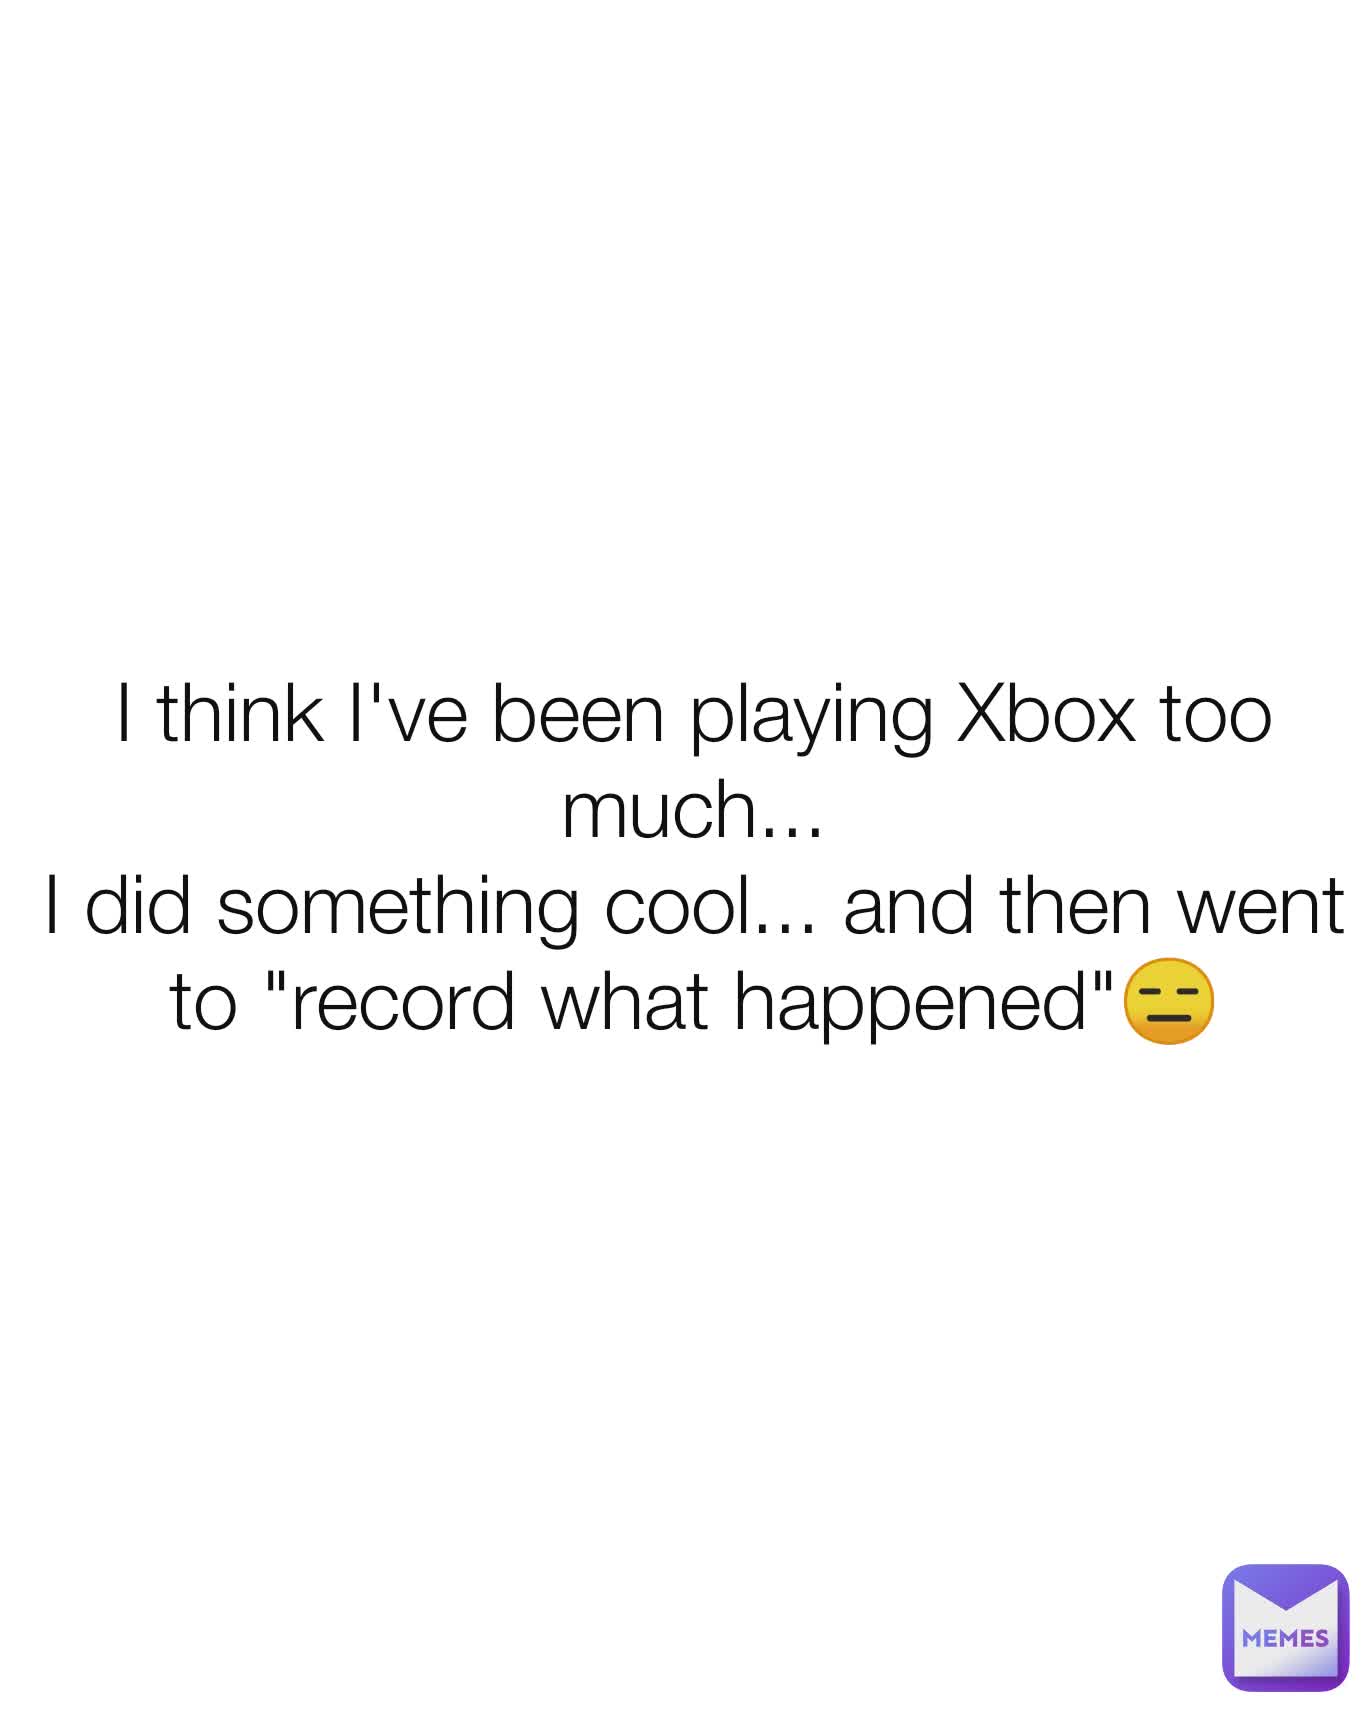 I think I've been playing Xbox too much...
I did something cool... and then went to "record what happened"😑